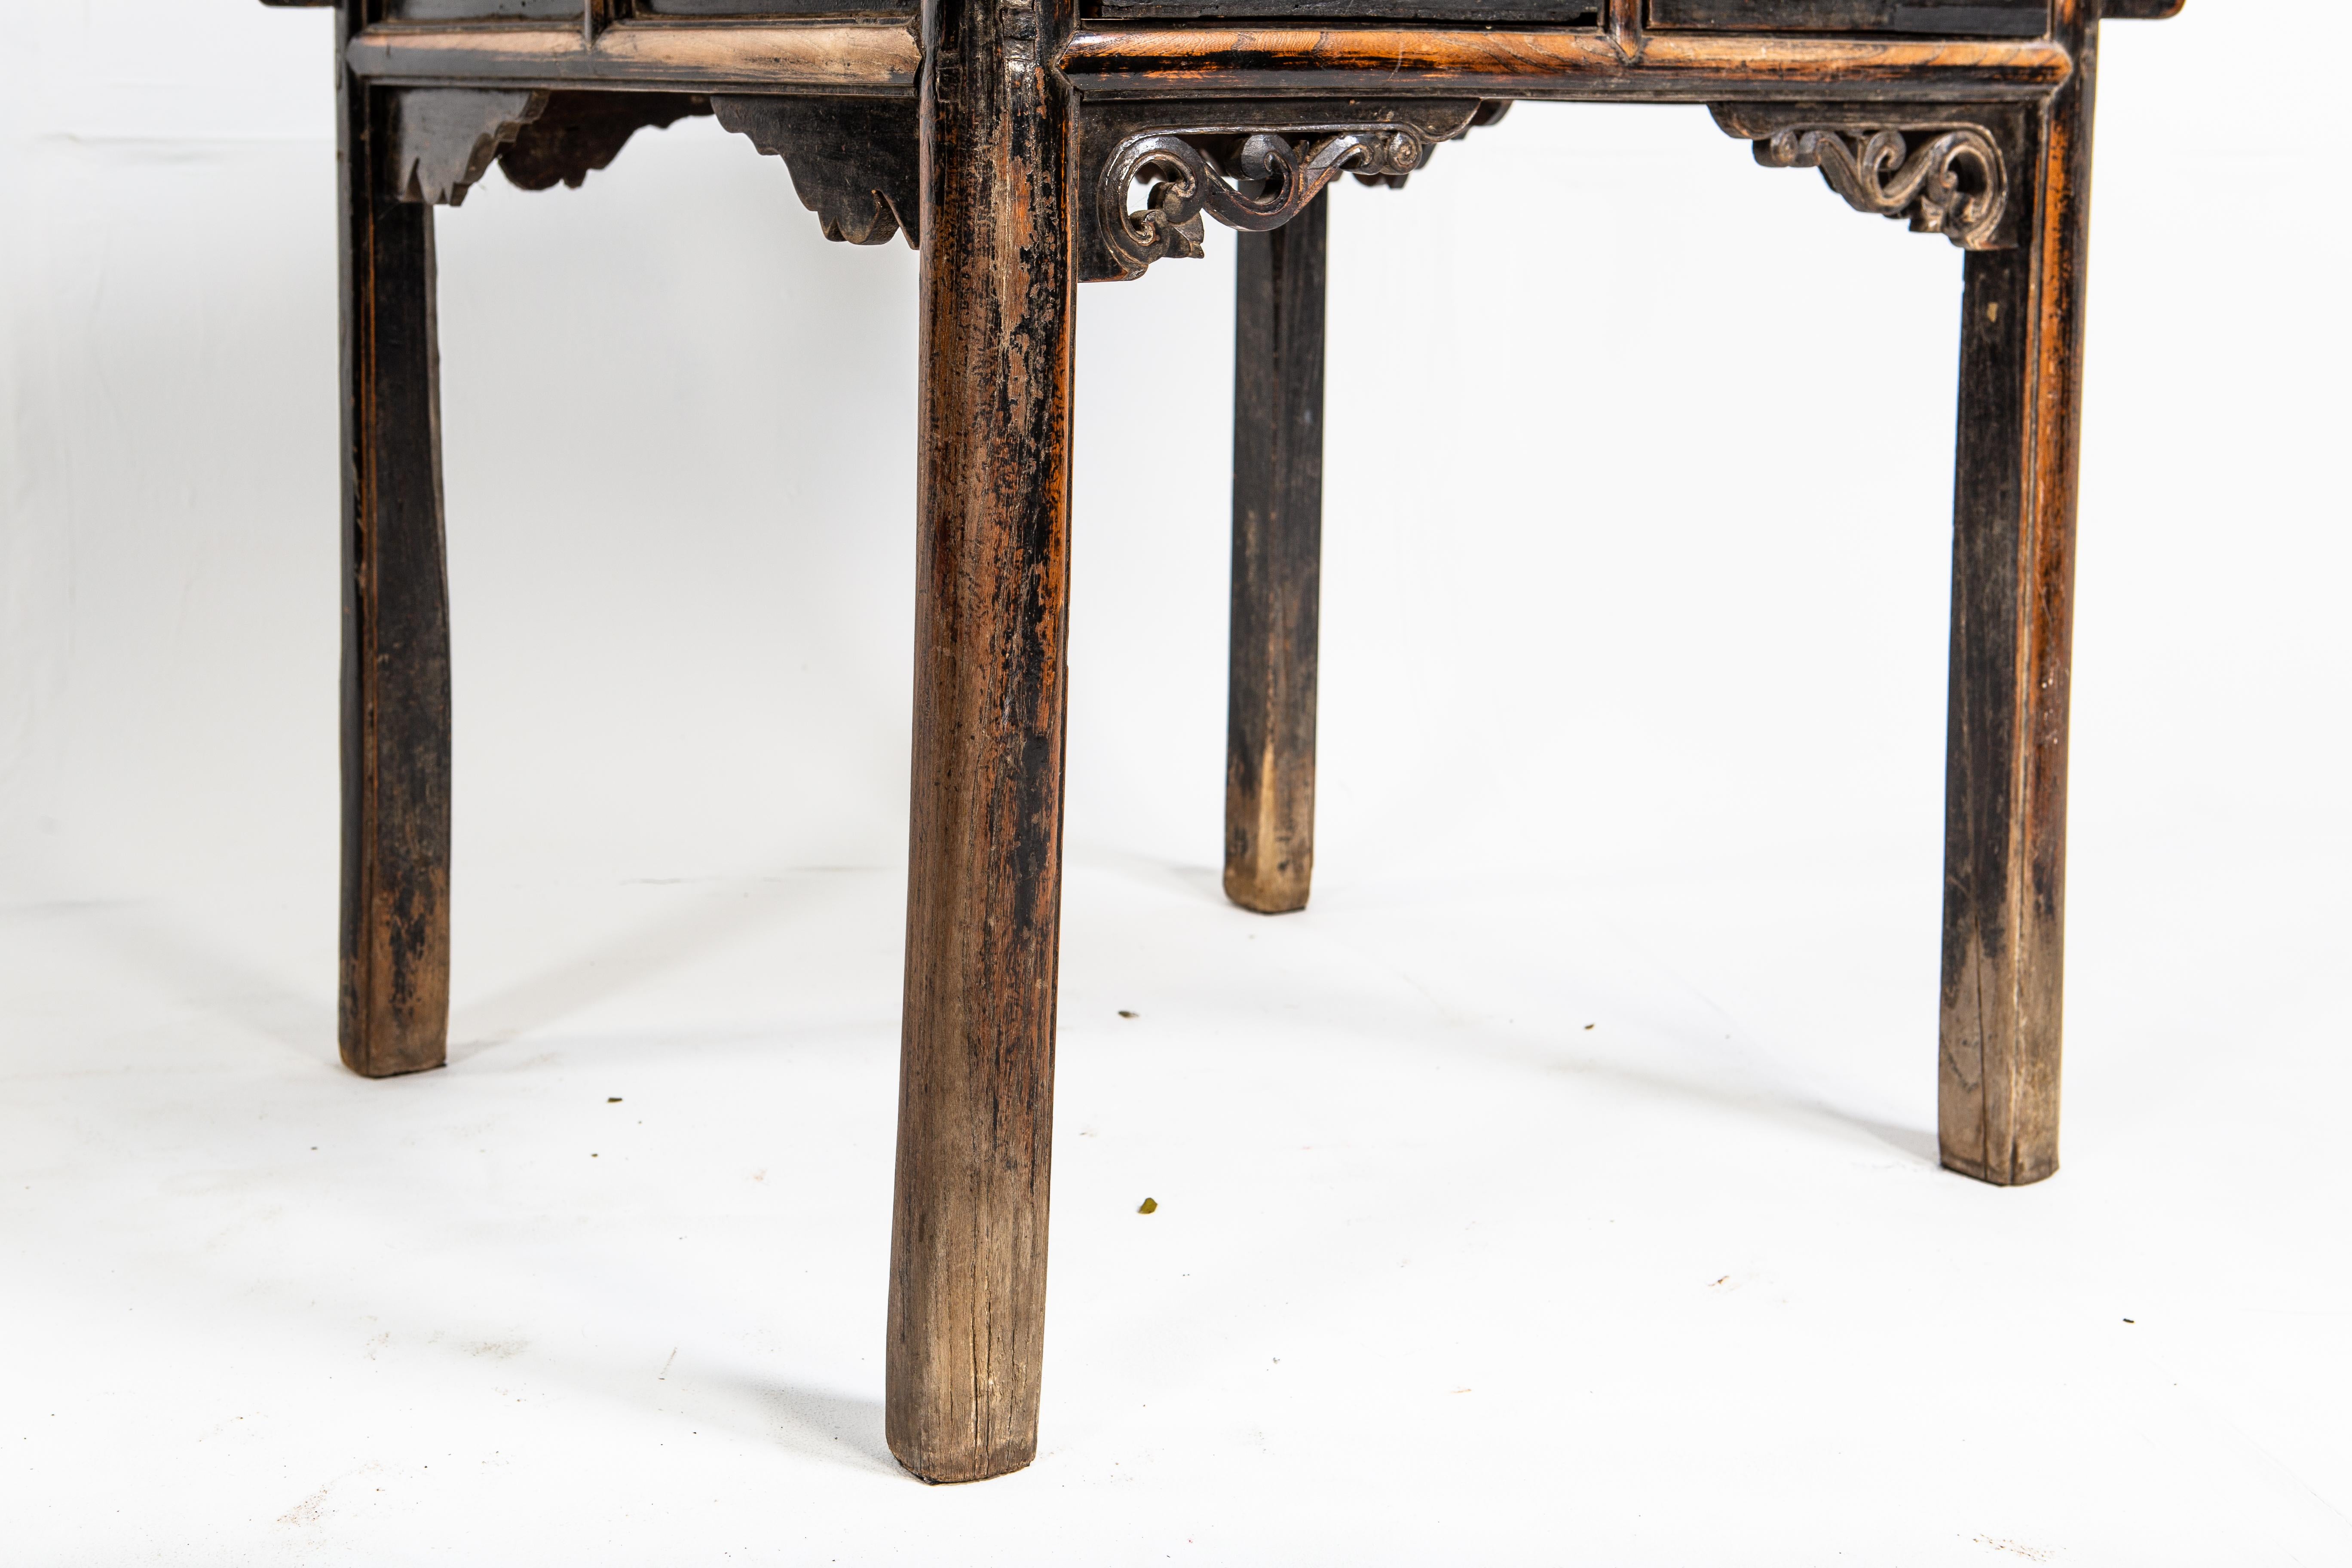 Late Qing Dynasty Square Table with Two Drawers 2